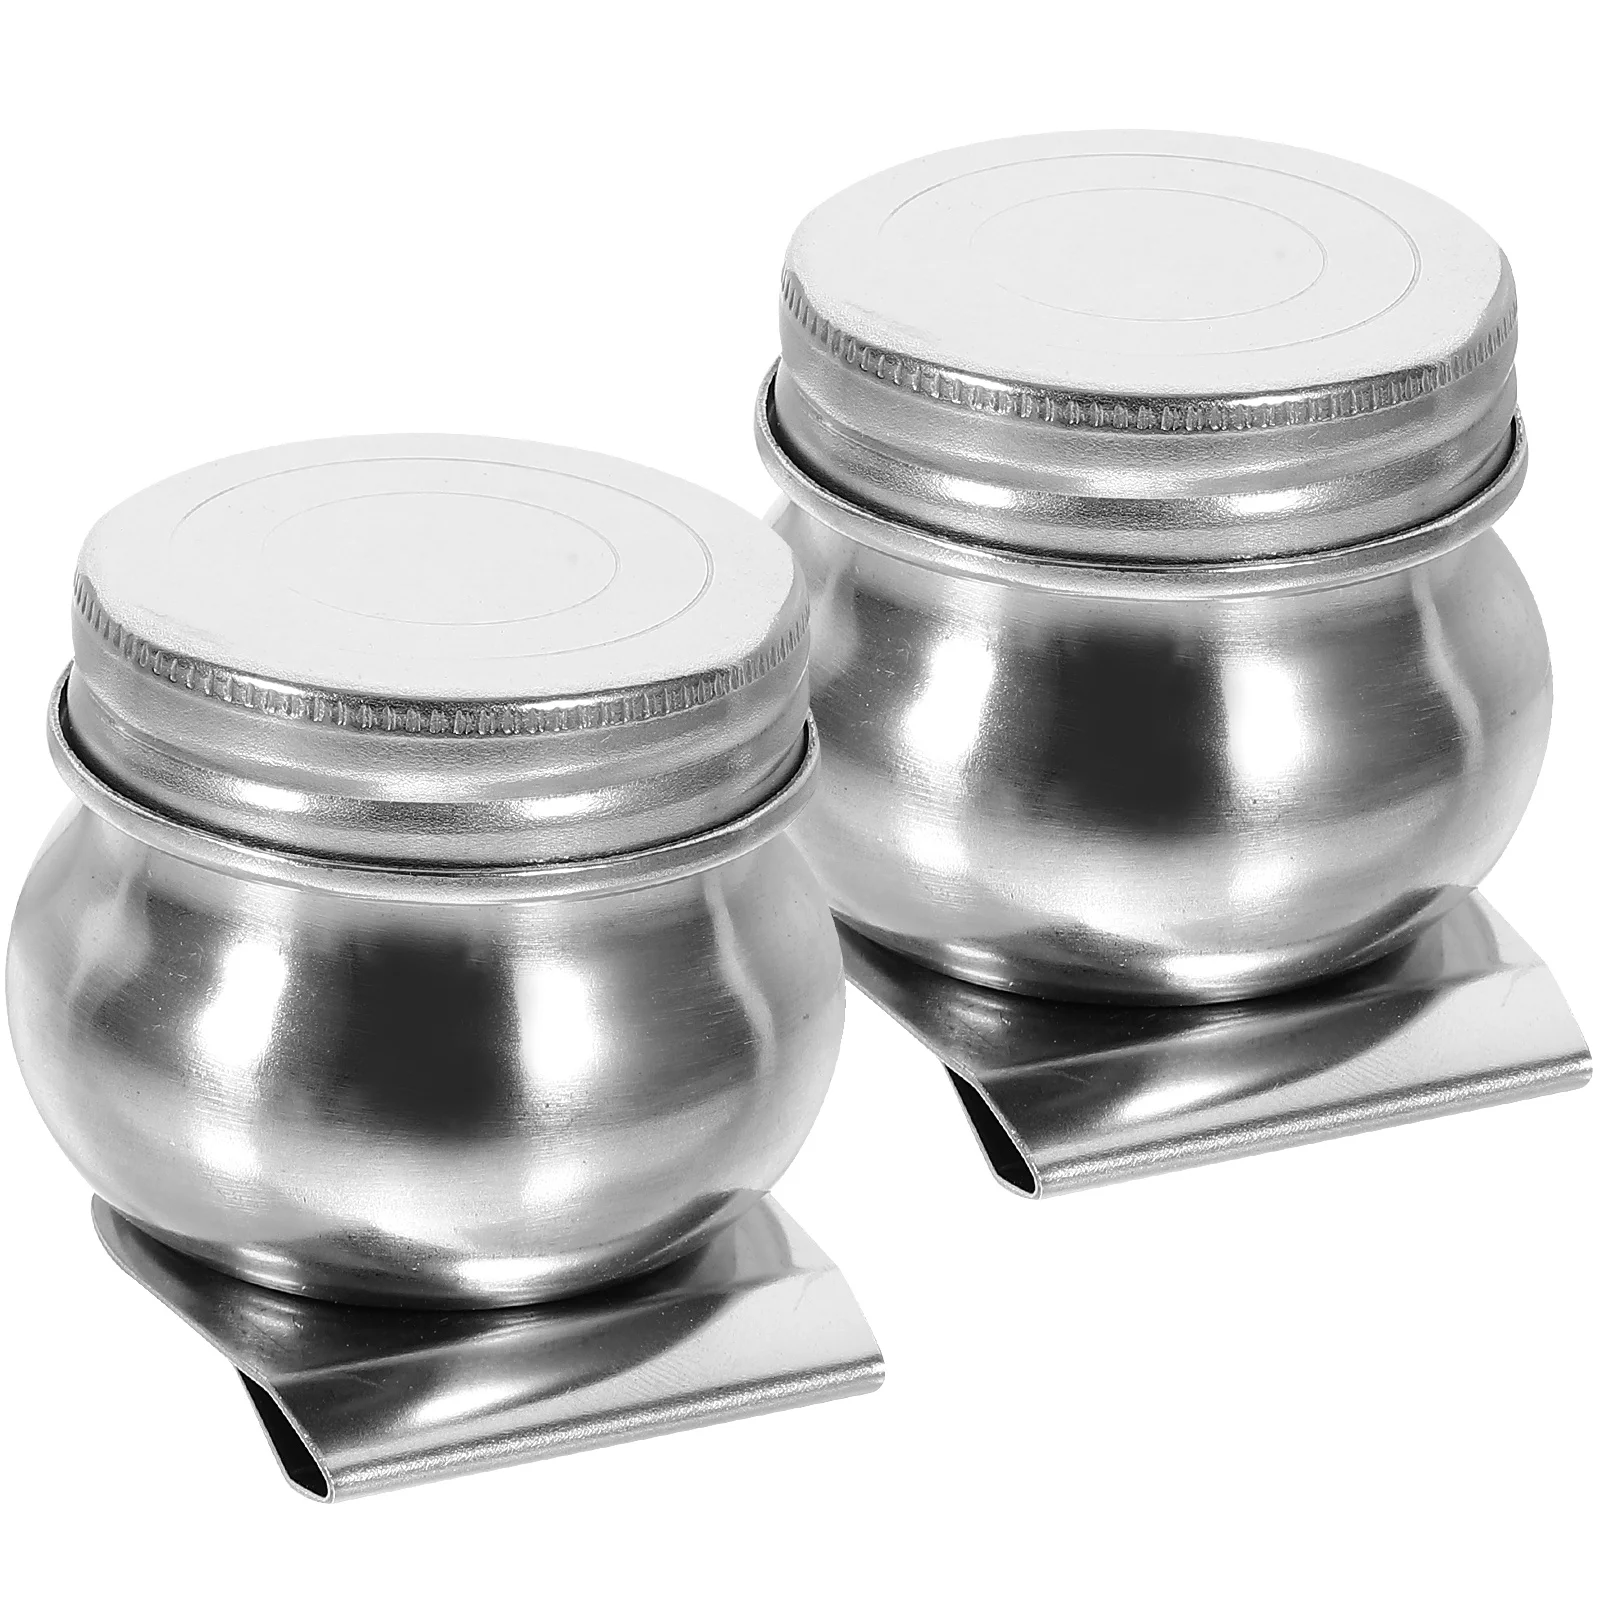 2 Pcs Stainless Steel Oil Paint Mixing Pot Drawing Supplies Box Portable Palettes Cup Painting Cleaning Container